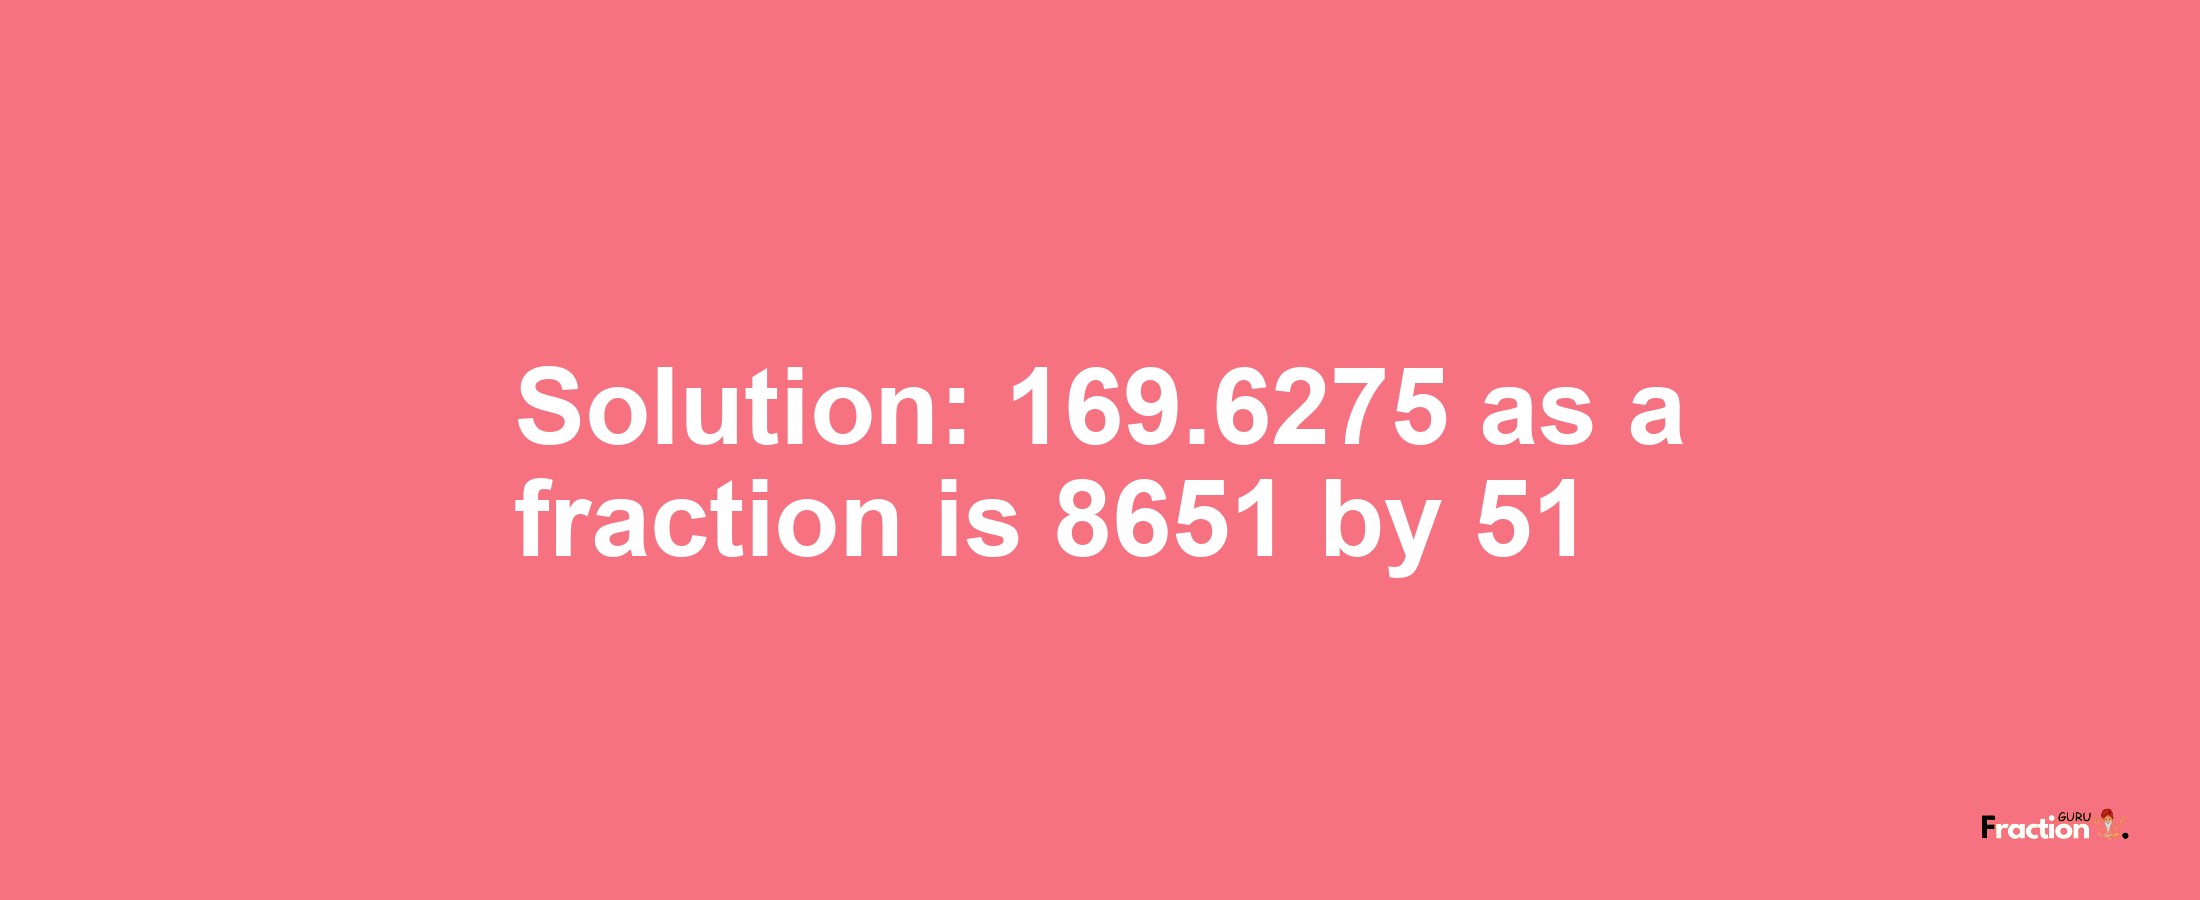 Solution:169.6275 as a fraction is 8651/51